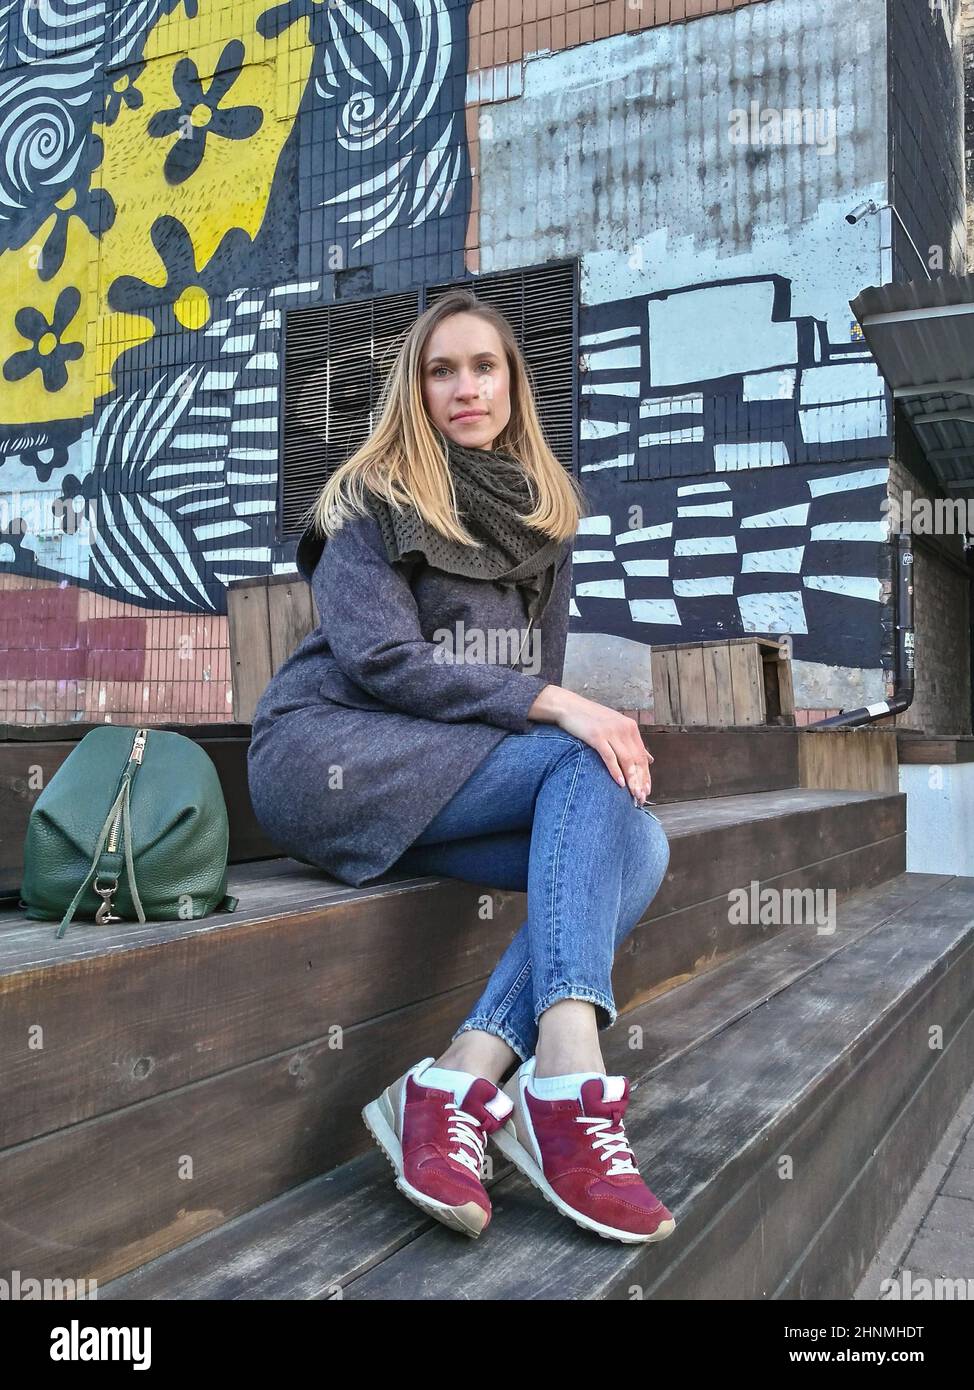 A young woman looks directly into the camera against the backdrop of a painted wall in the fall Stock Photo